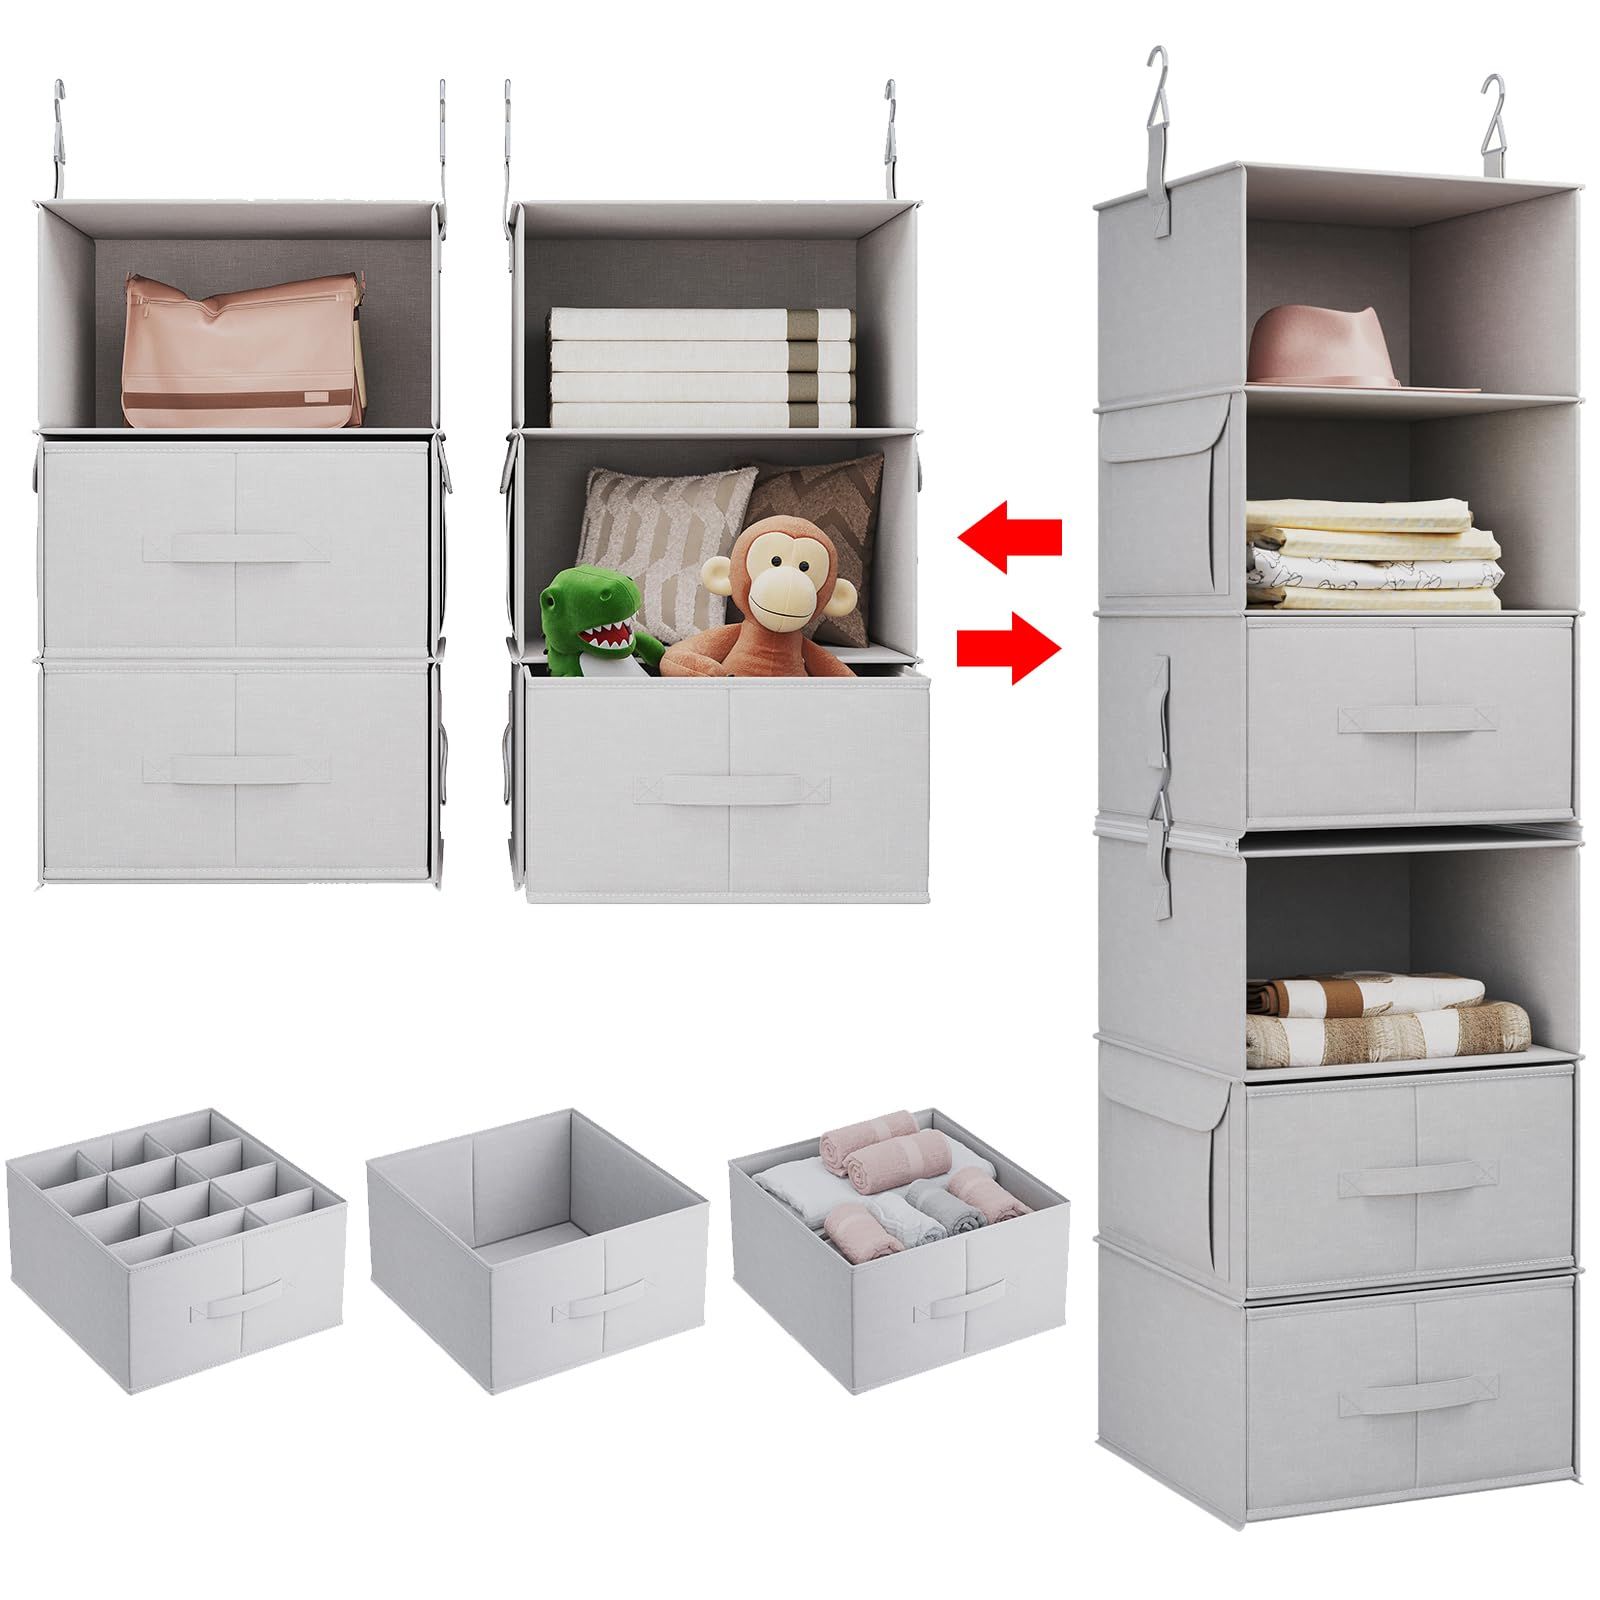 2017 2 Separable Wardrobes For Amazon: Vailando 6 Shelf Hanging Closet Organizer, 2 Separable 3 Shelf  Hanging Shelves With 3 Drawers For Wardrobe, Nursery, Baby Clothes  Organization And Storage : Home & Kitchen (Photo 1 of 10)